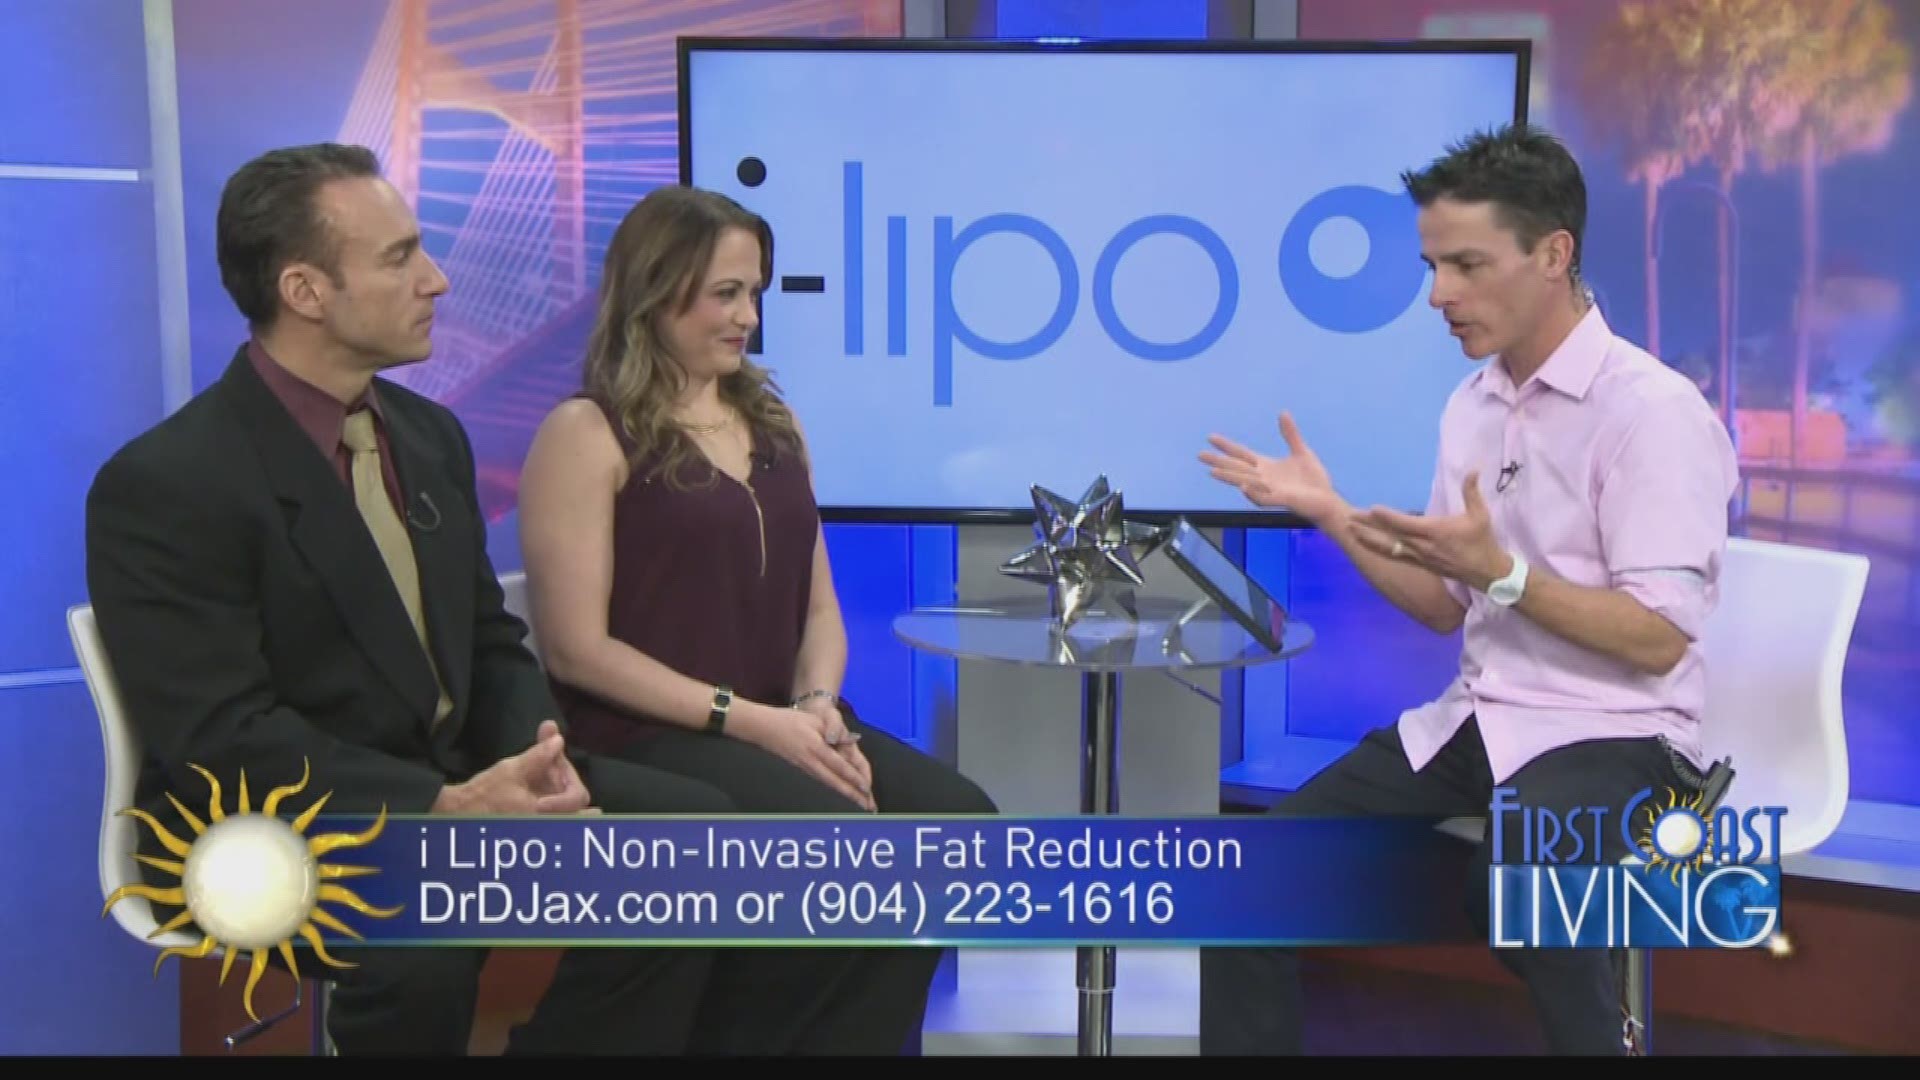 Can't get rid of those last few stubborn pounds? i-Lipo may be able to help.